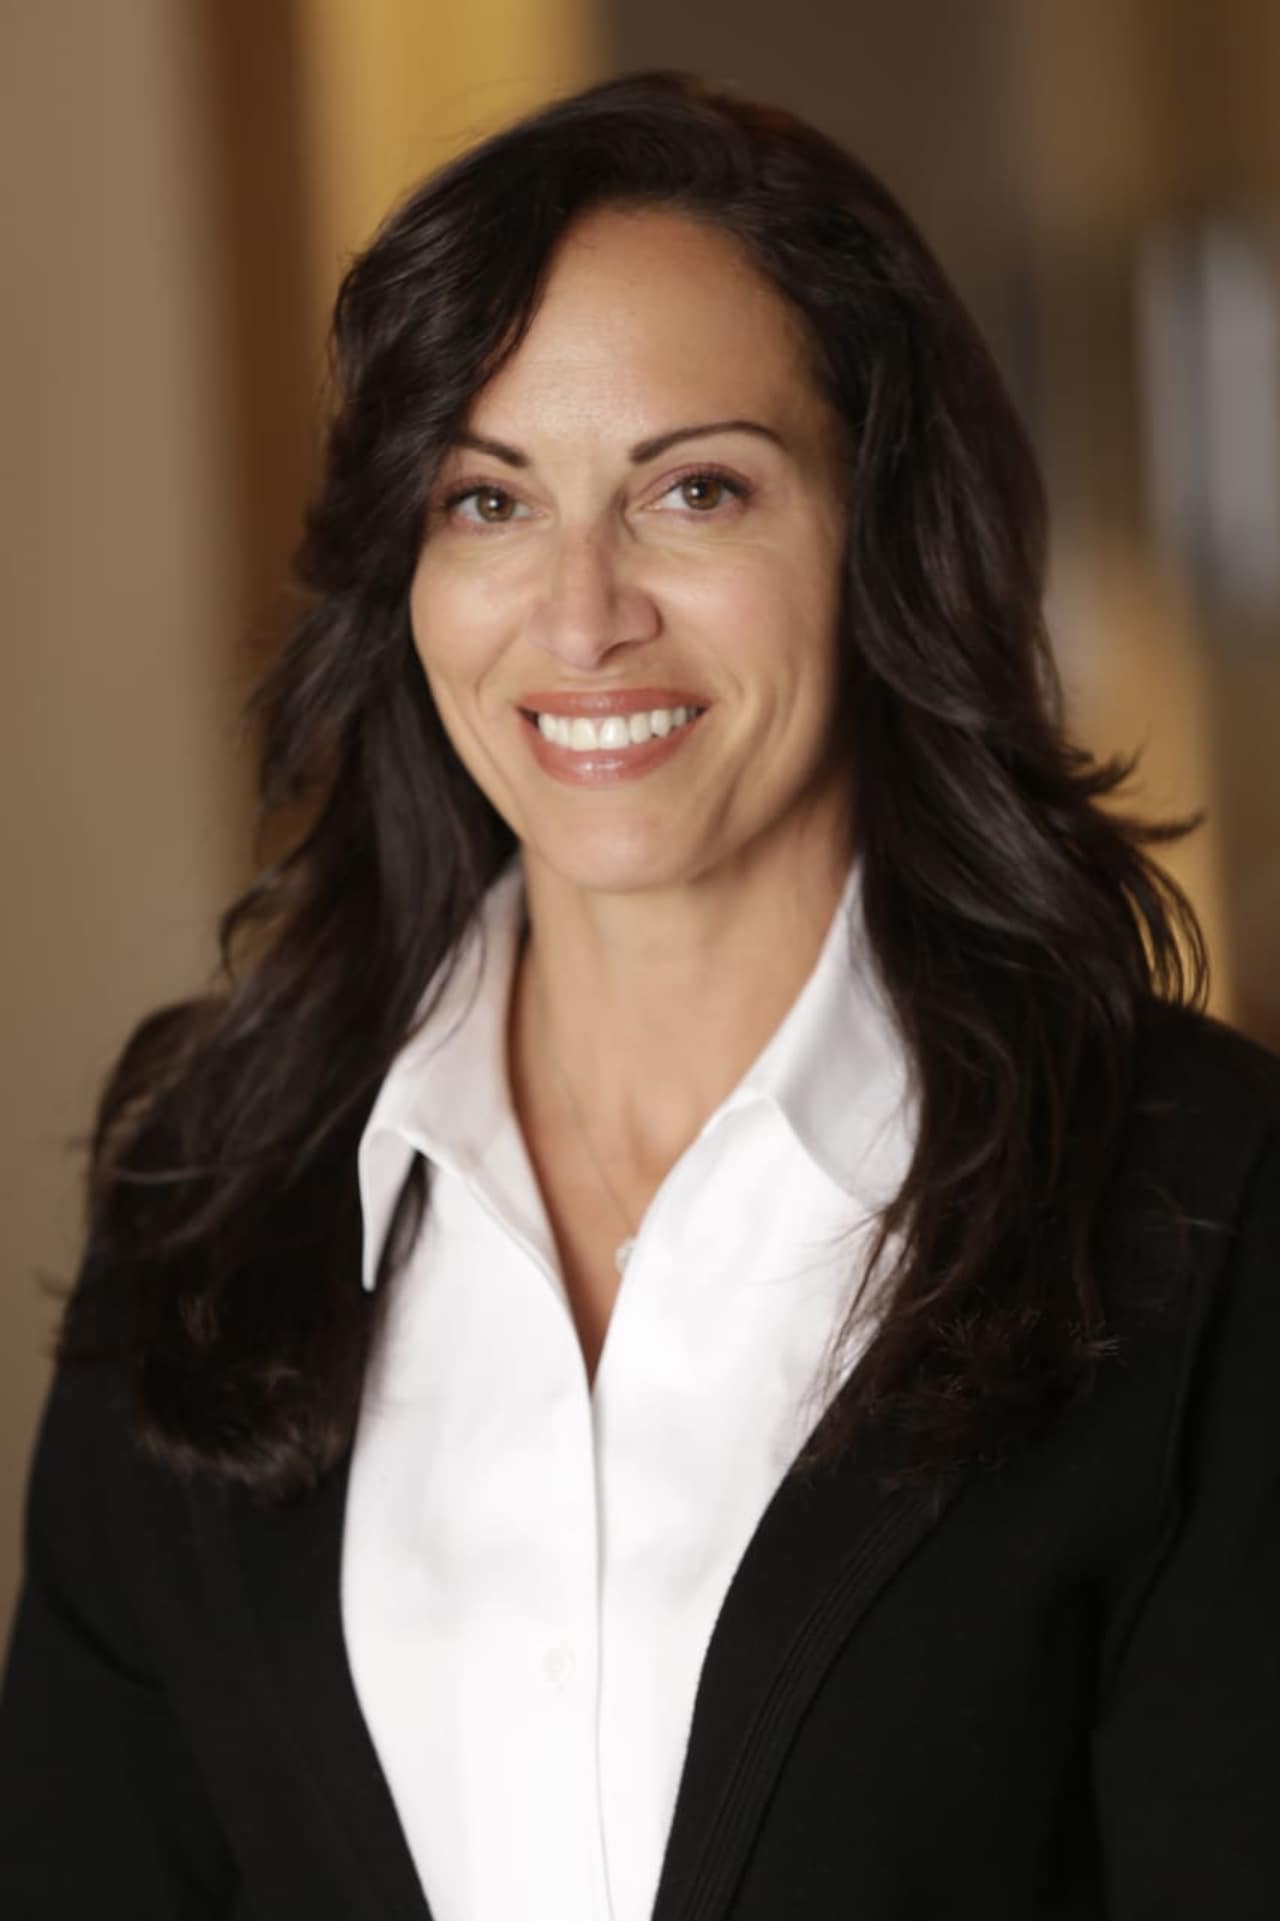 Theodora Diamantis, Building Project Director, oversees multimillion dollar construction developments in the New York area and throughout the country.